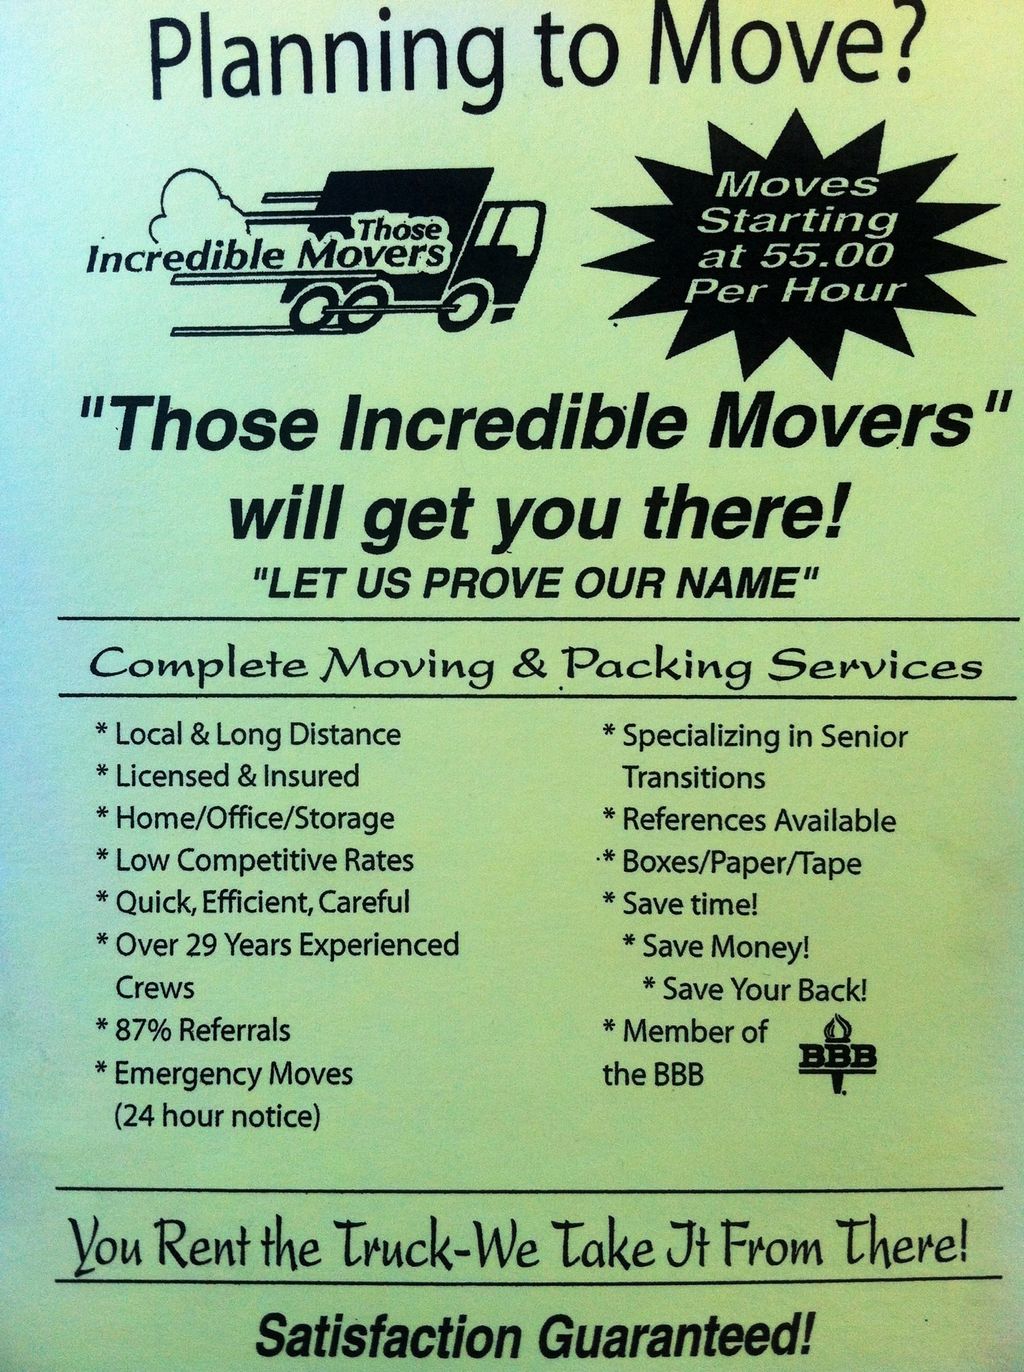 Those Incredible Movers